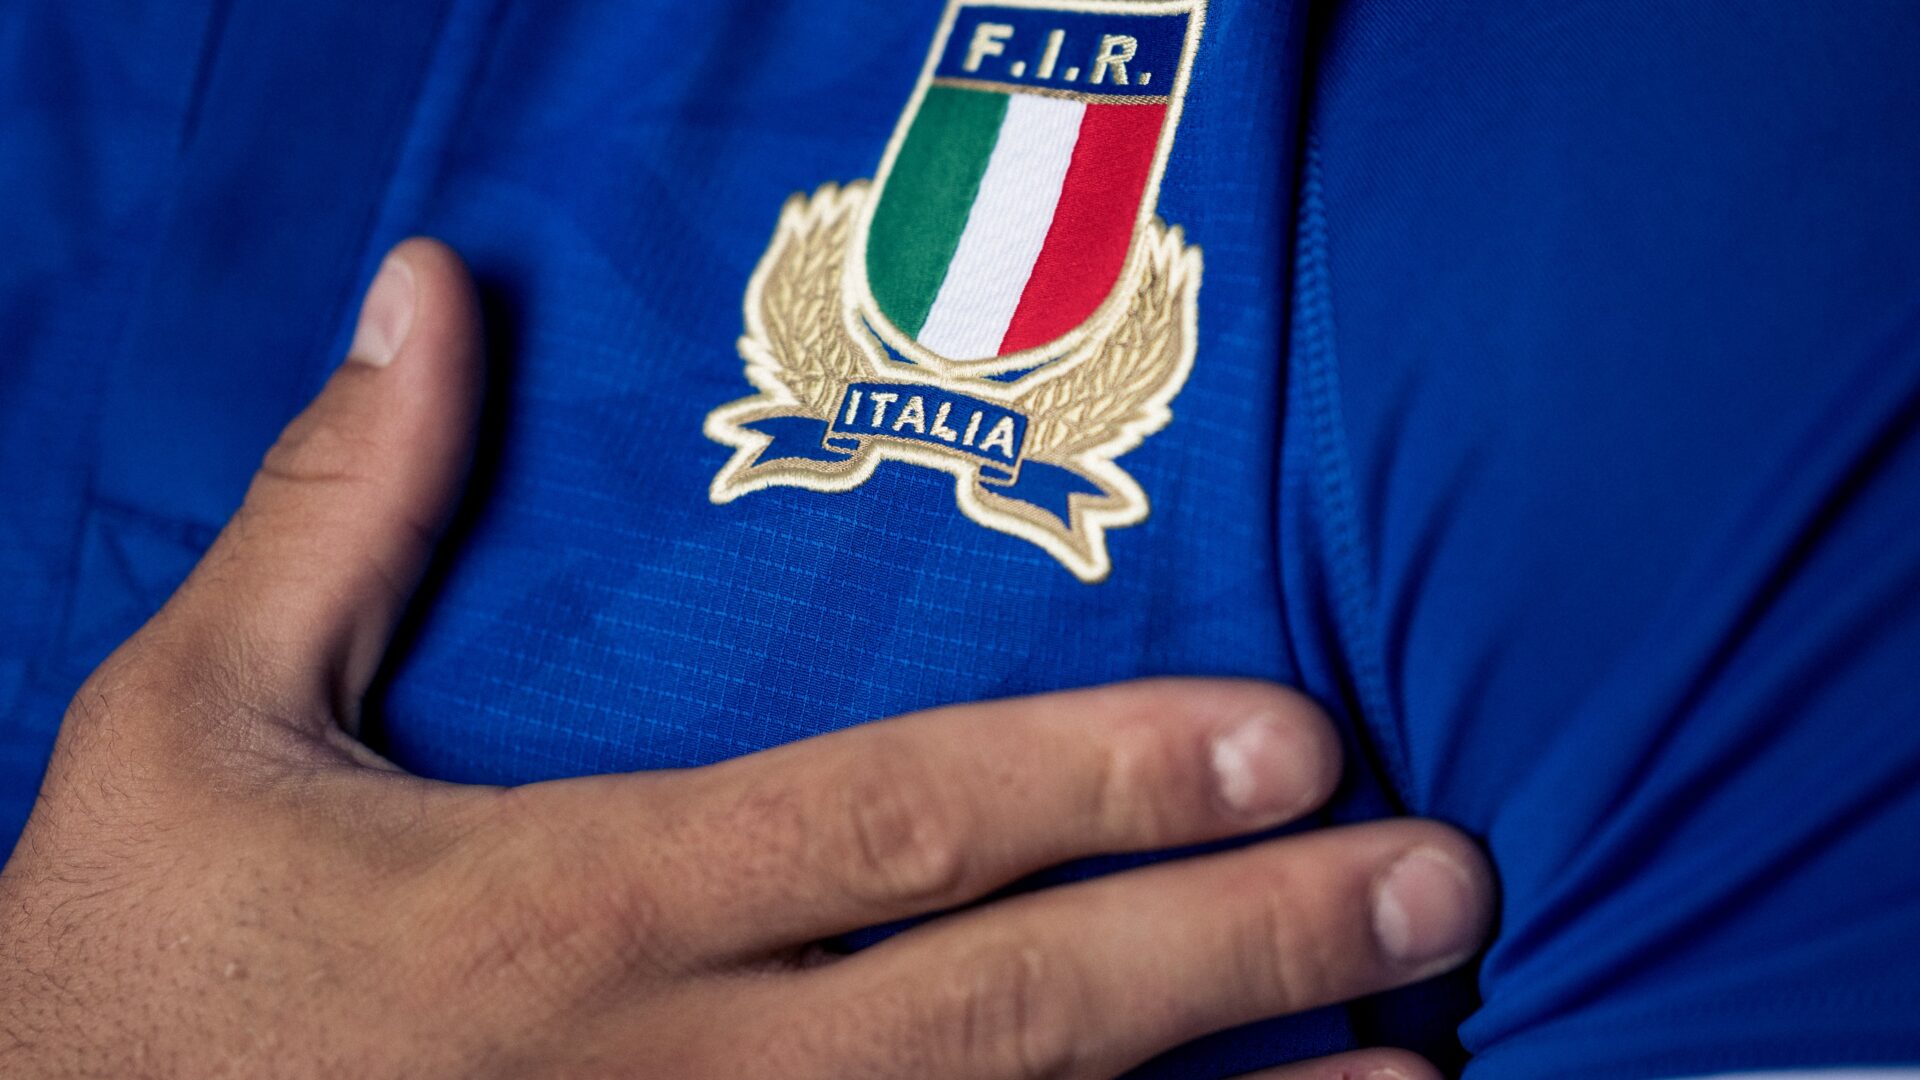 Italie rugby six nations